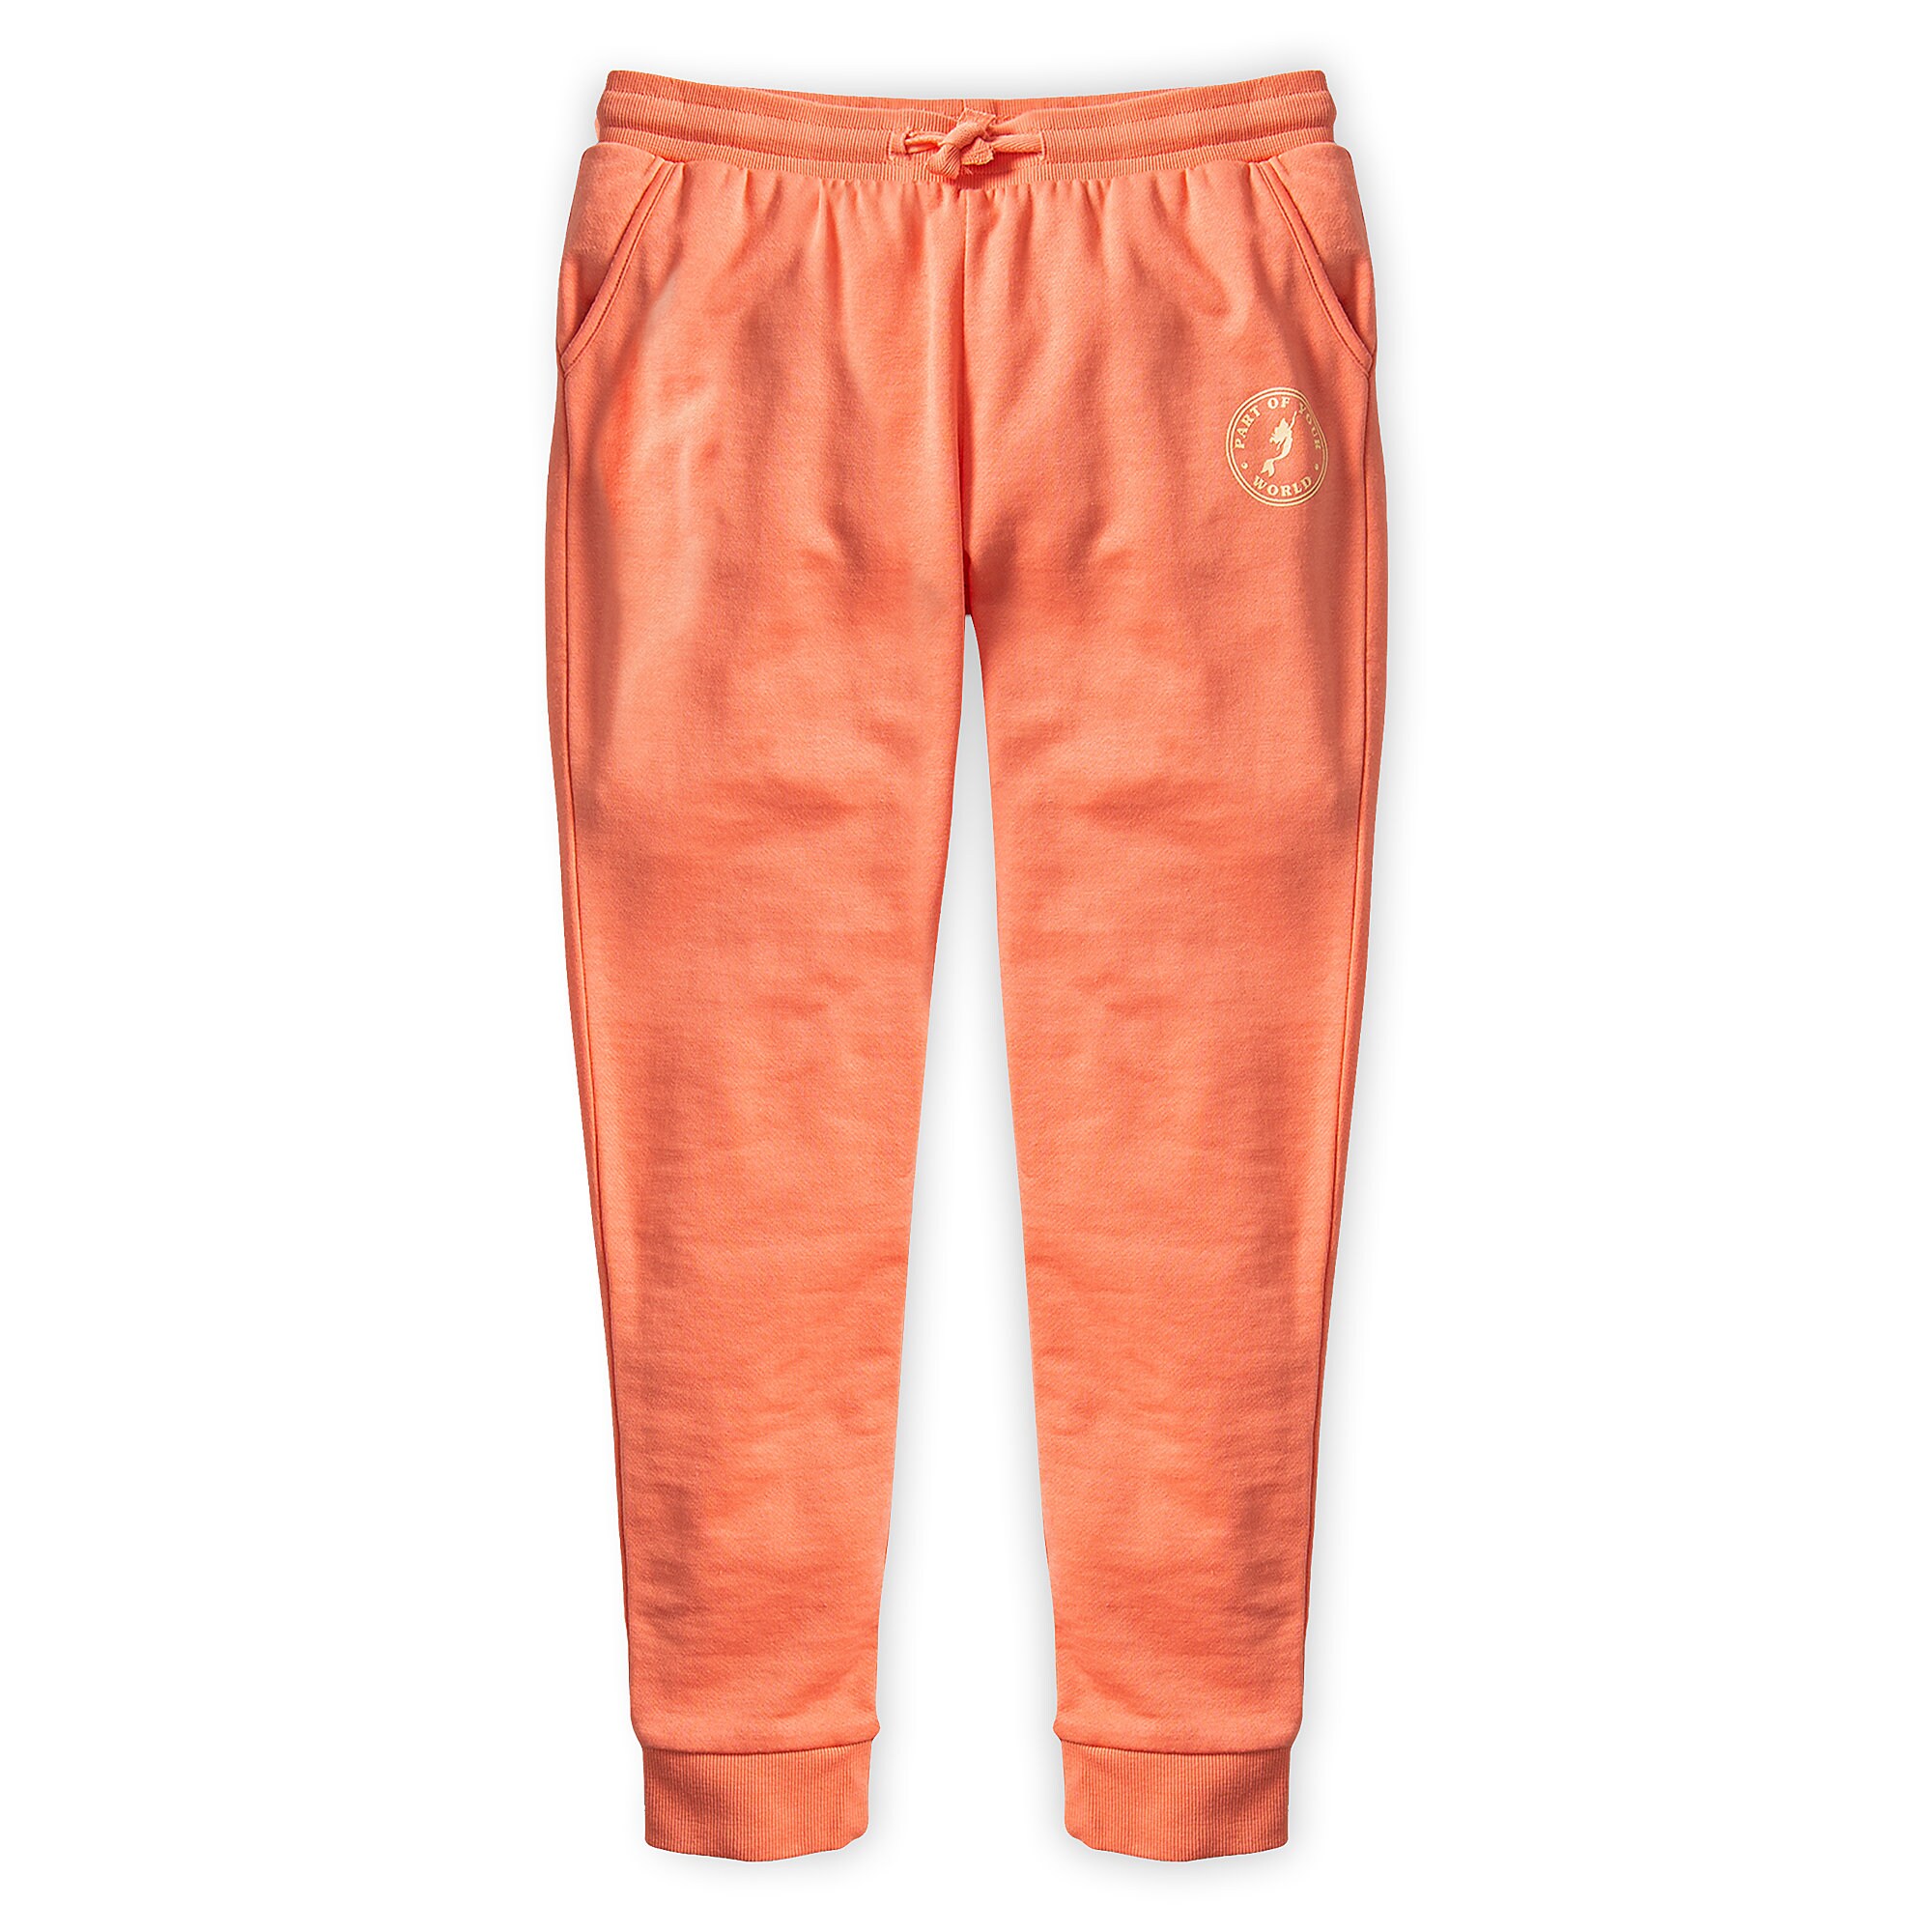 The Little Mermaid Sweatpants for Girls by ROXY Girl - Coral